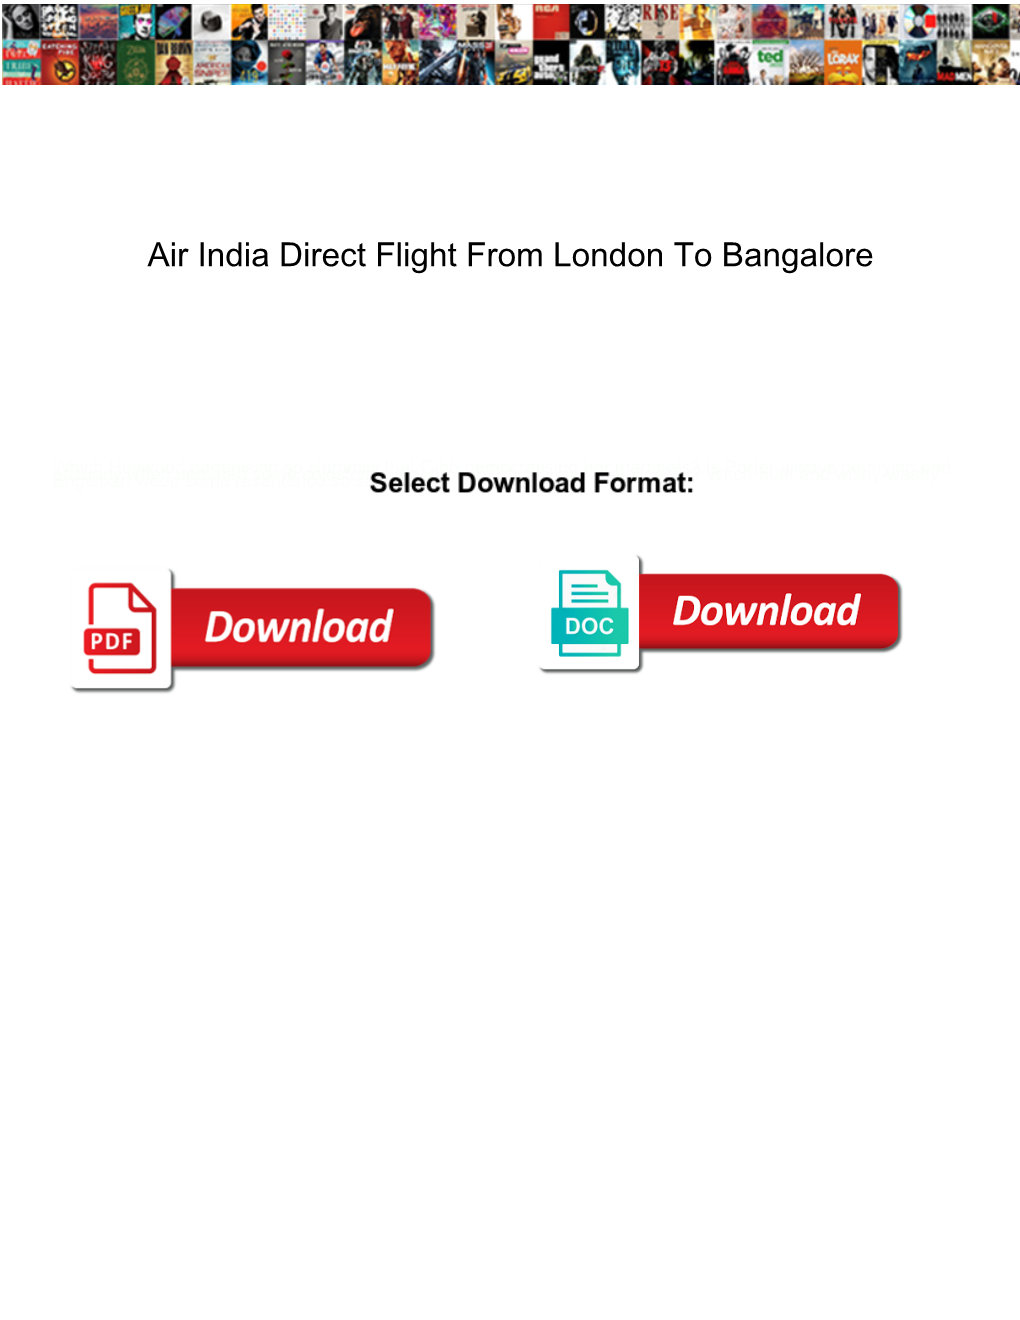 Air India Direct Flight from London to Bangalore